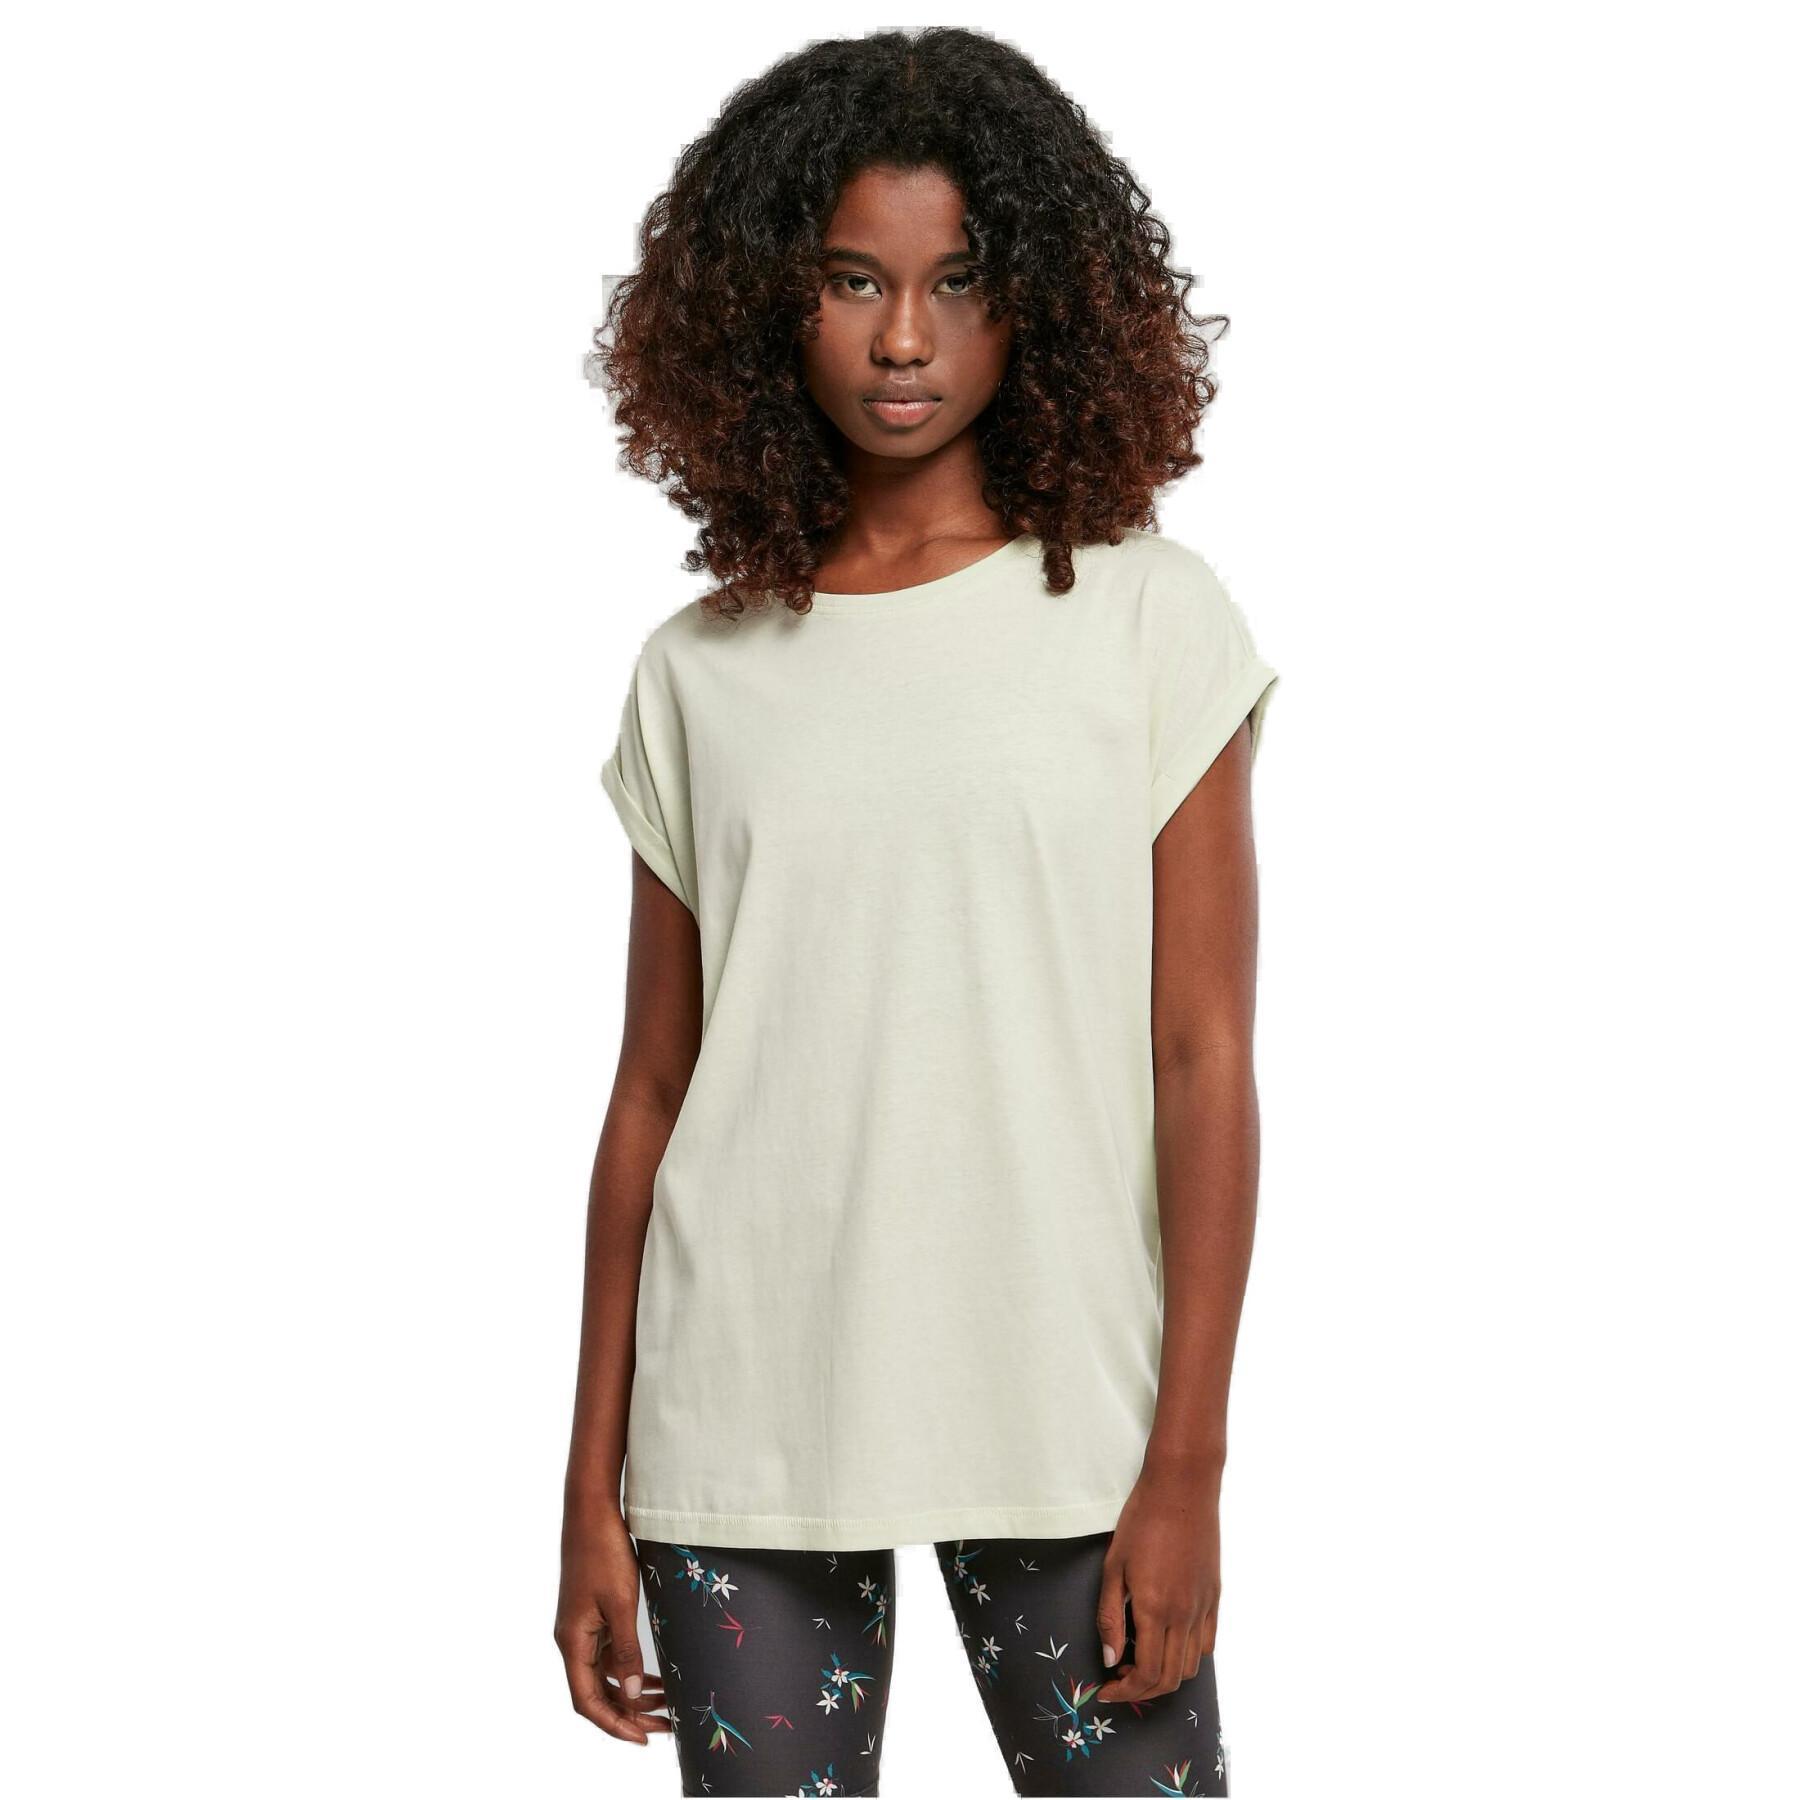 Camiseta Urban Classics mujer Extended Shoulder Tee - Lifestyle - Camisetas  - Mujer